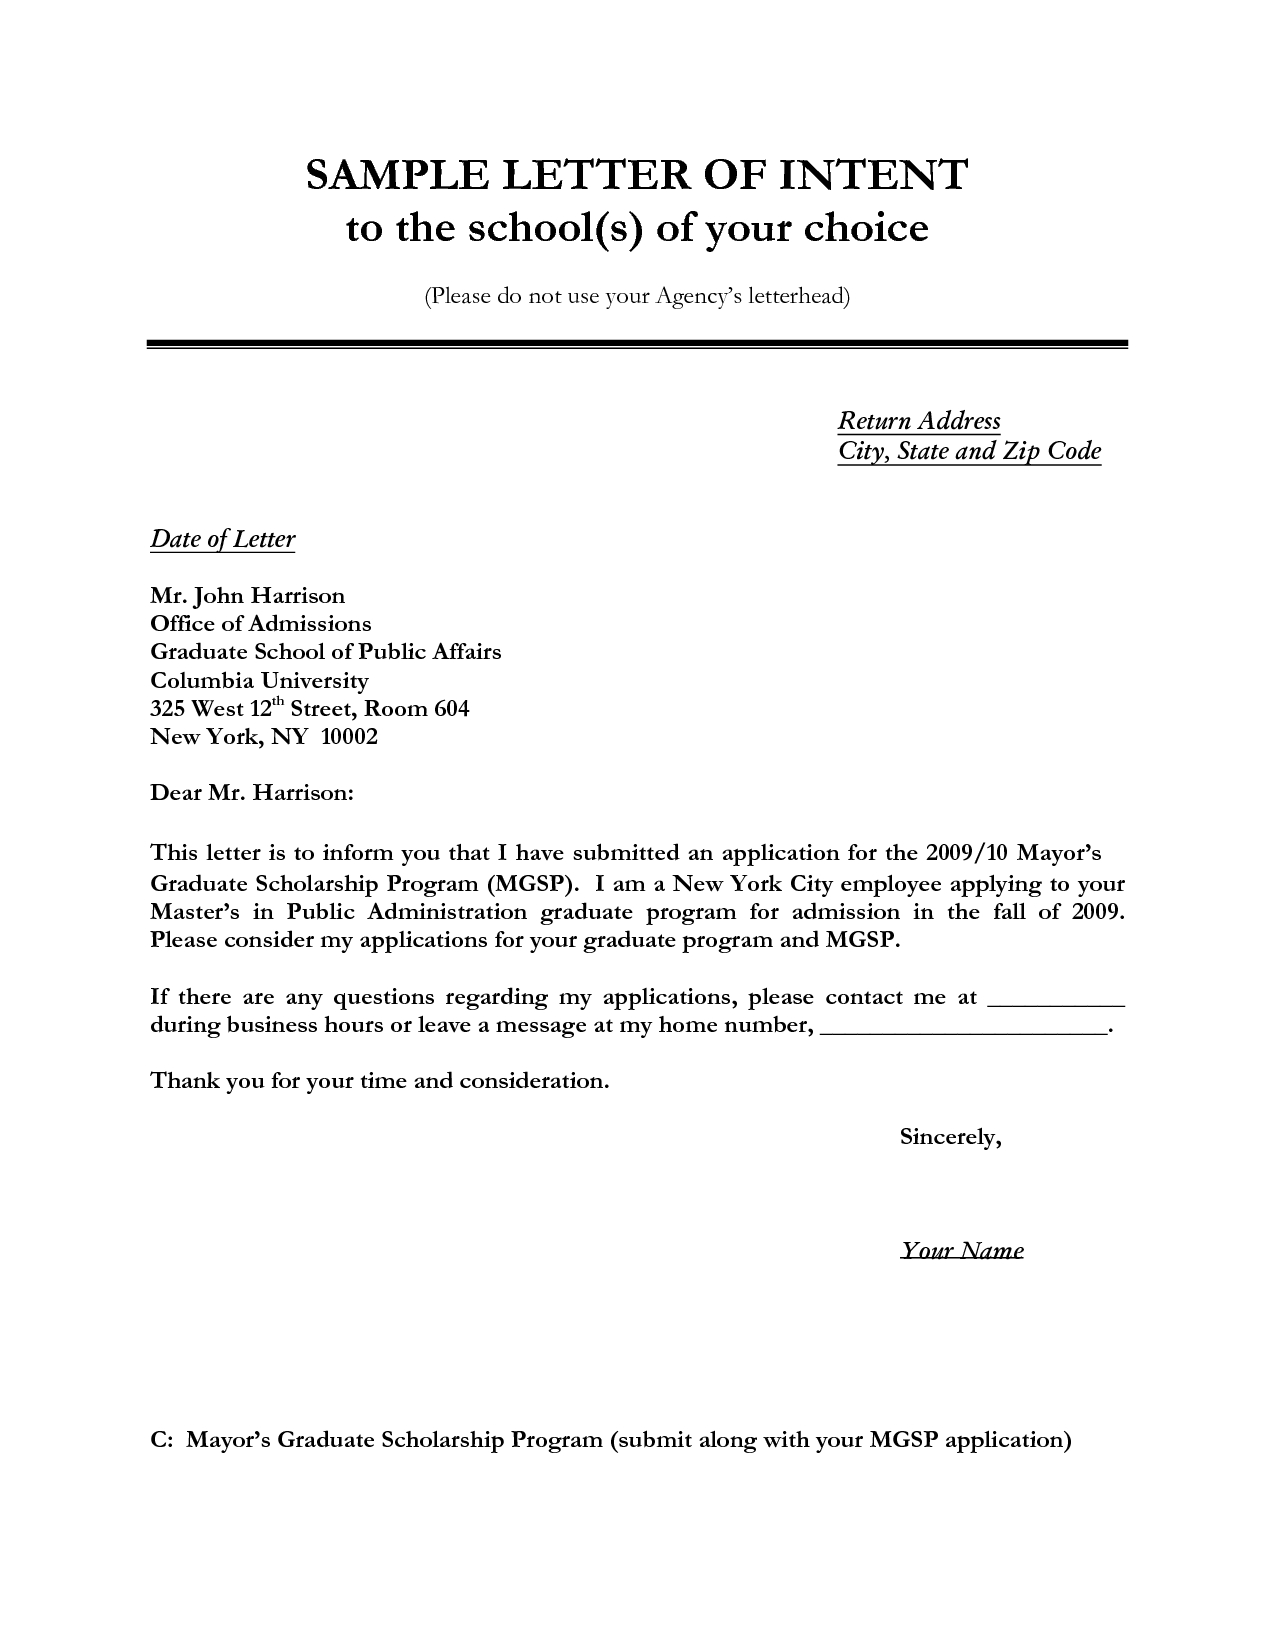 Free Notarized Letter Template - Letter Of Intent Sample